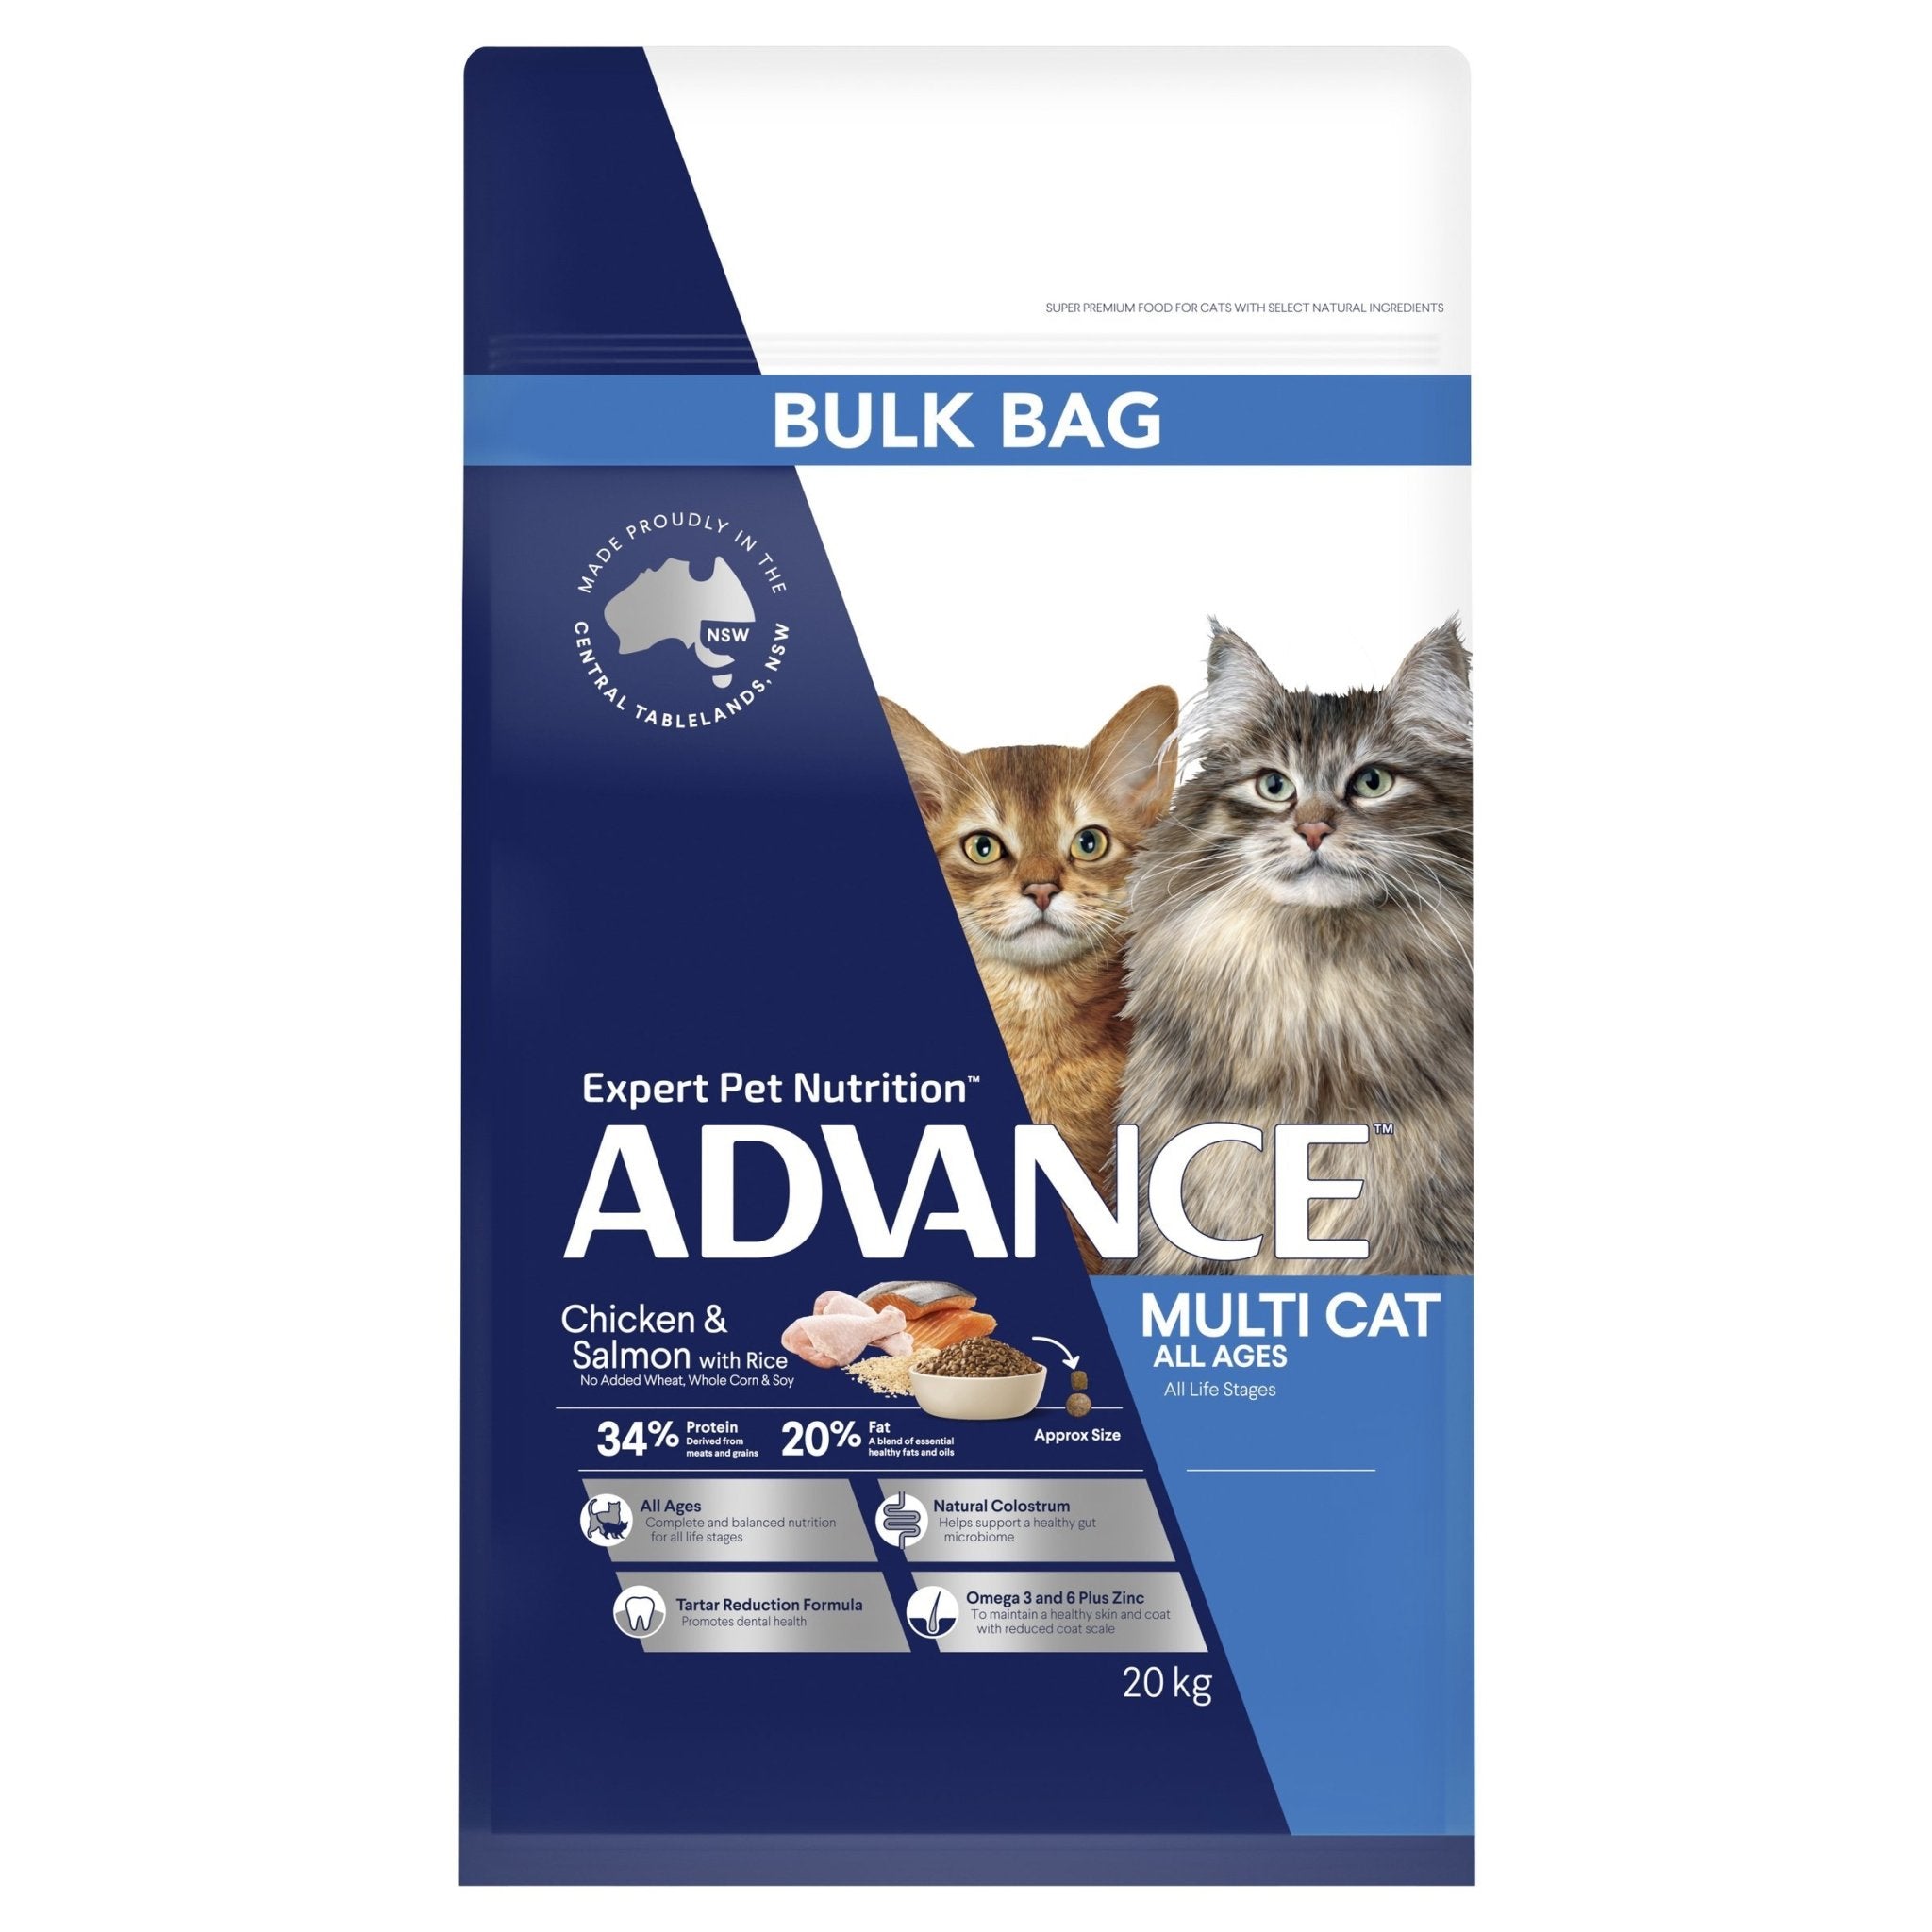 ADVANCE Multi Cat Dry Cat Food Chicken & Salmon with Rice